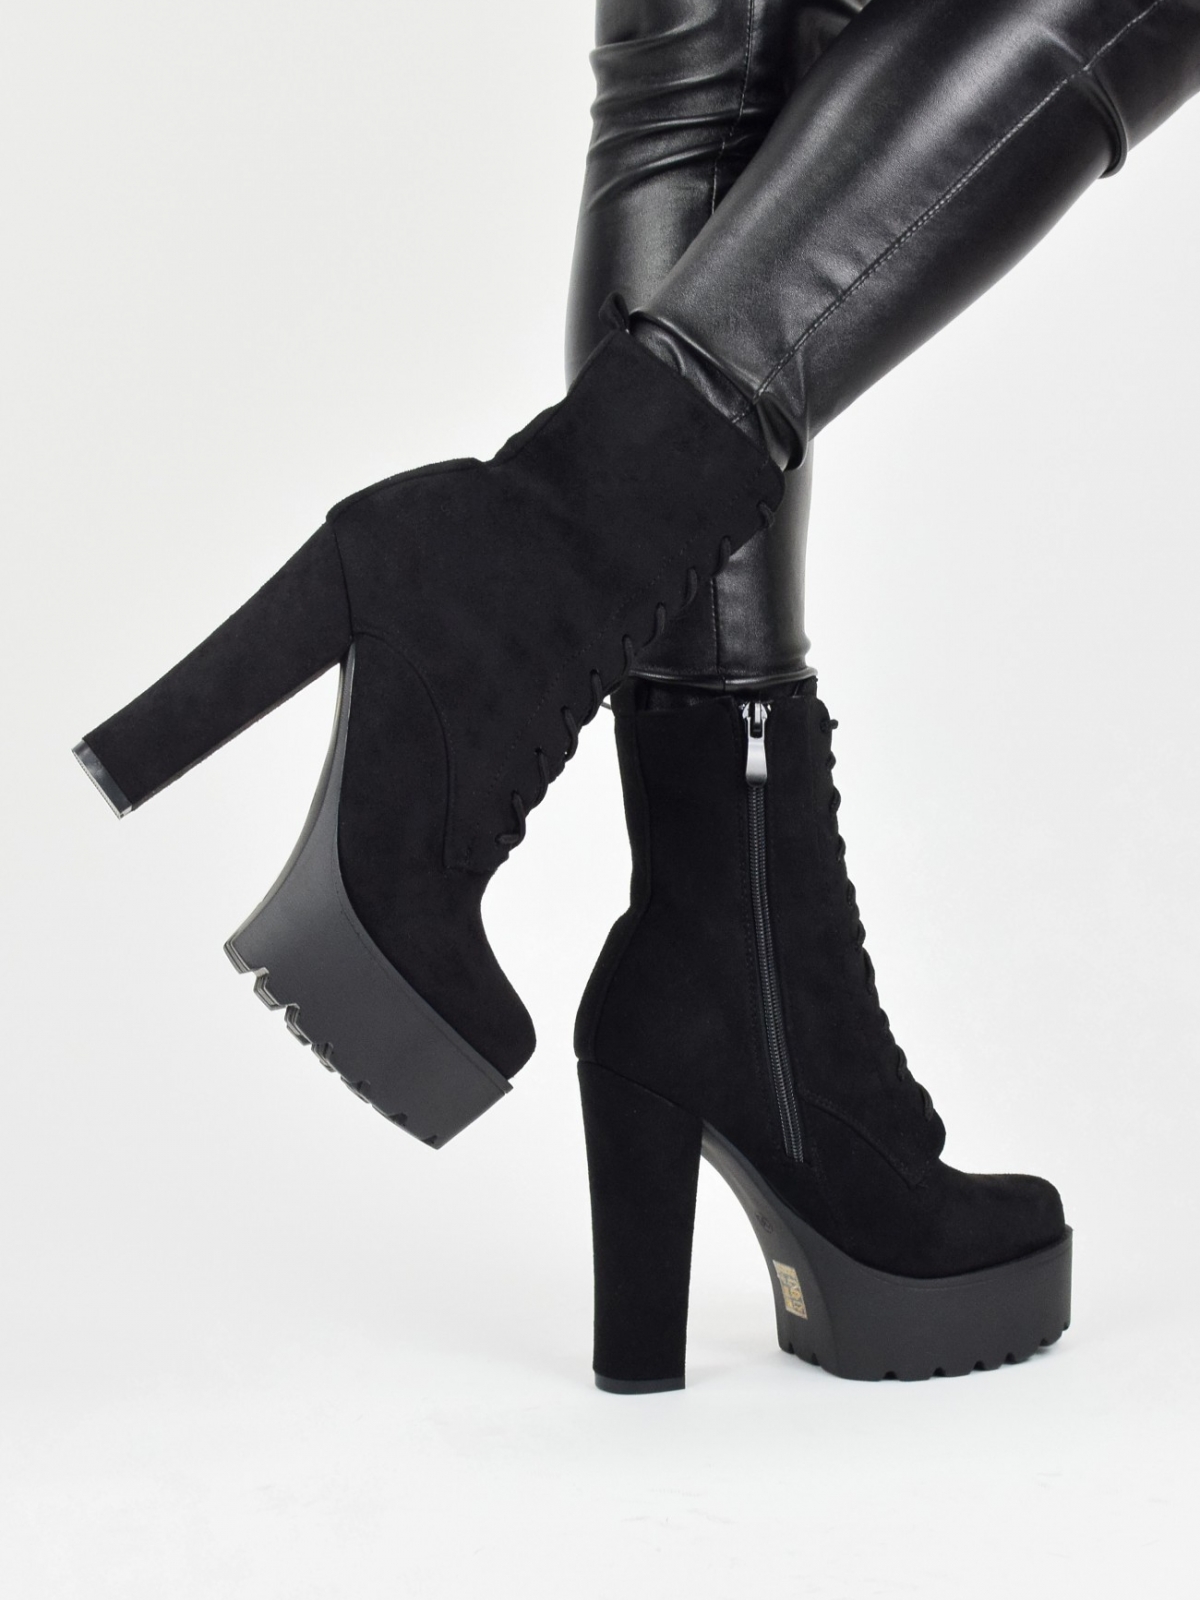 High block heeled lace up platform boots with side zip in black